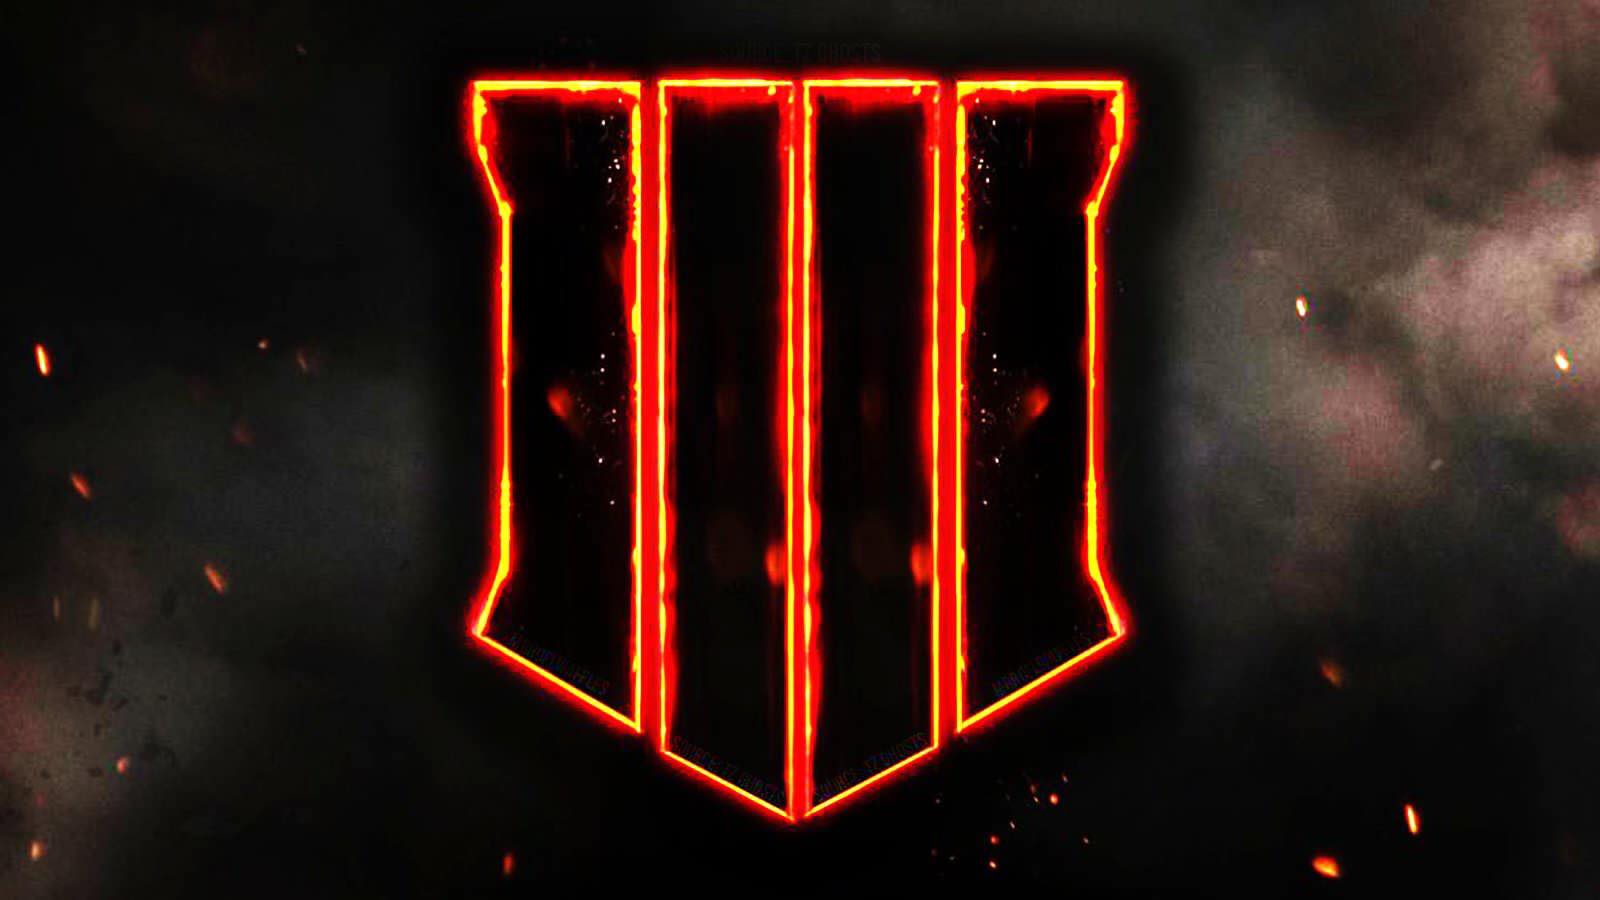 Call of Duty Black Ops 4 Confirmed for October 2018